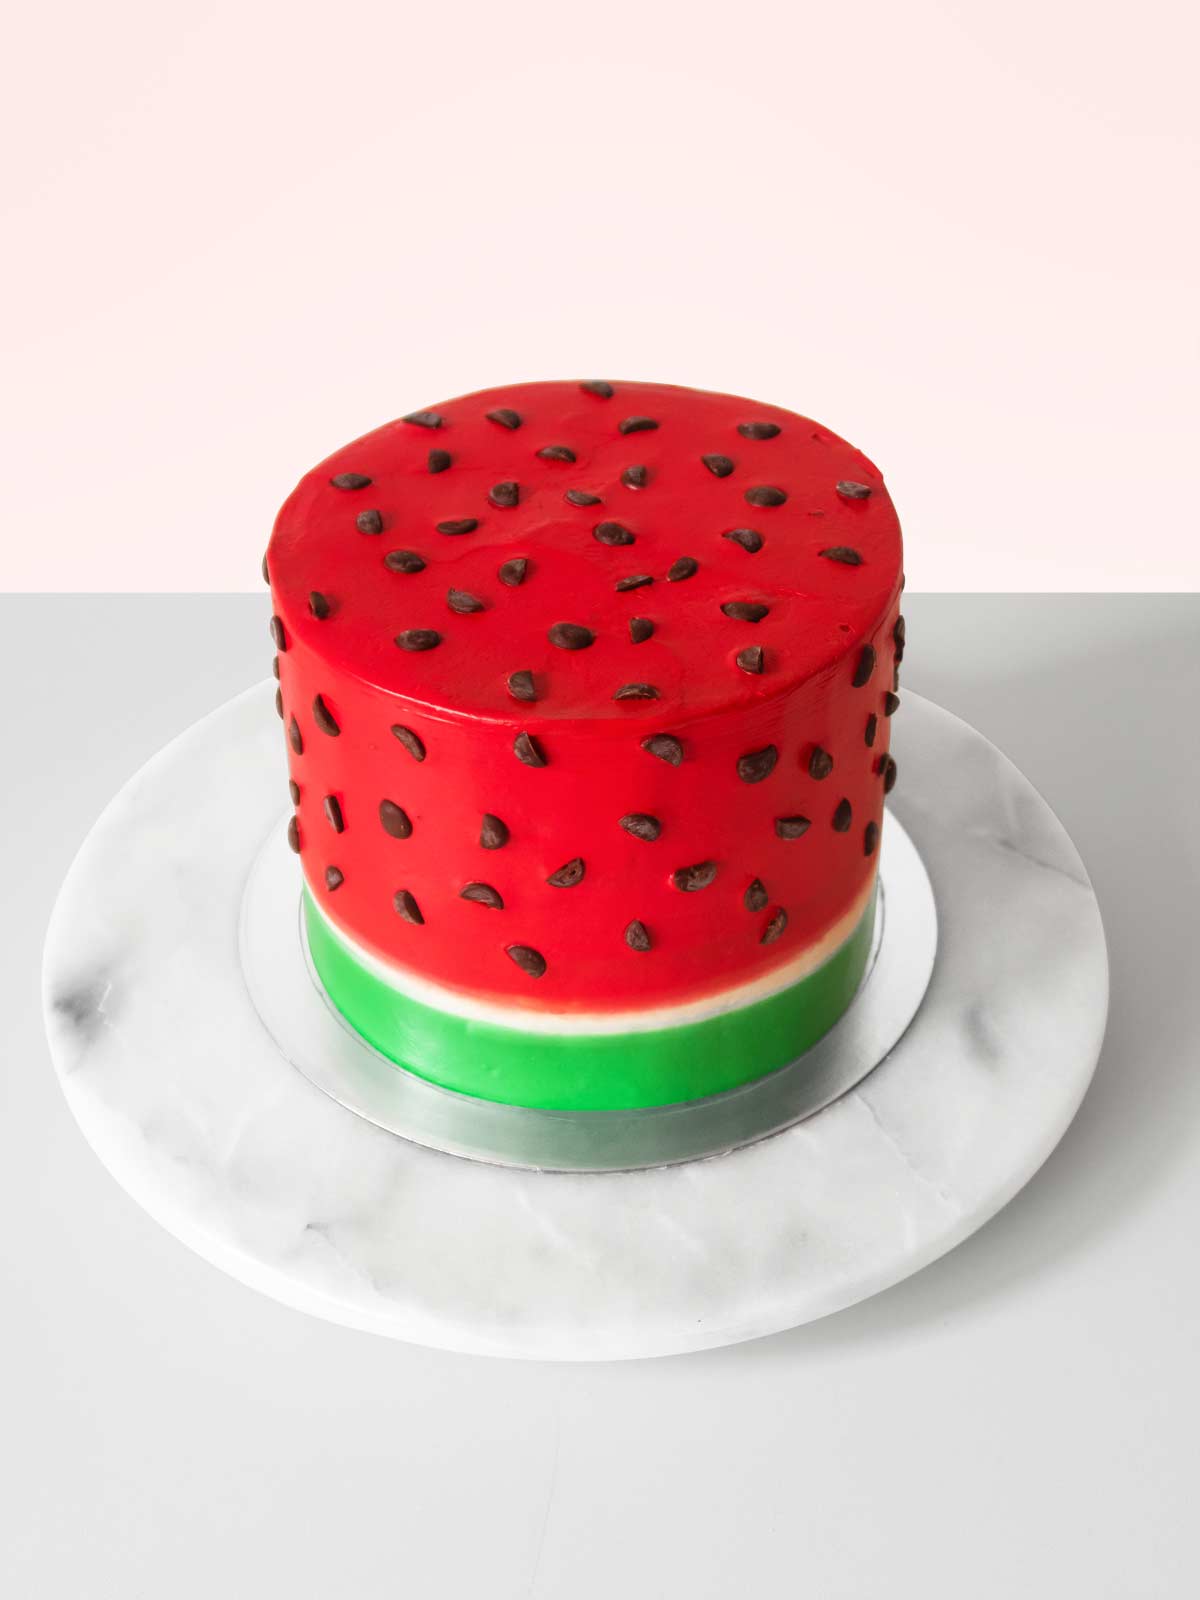 Watermelon Cake Delivered in London